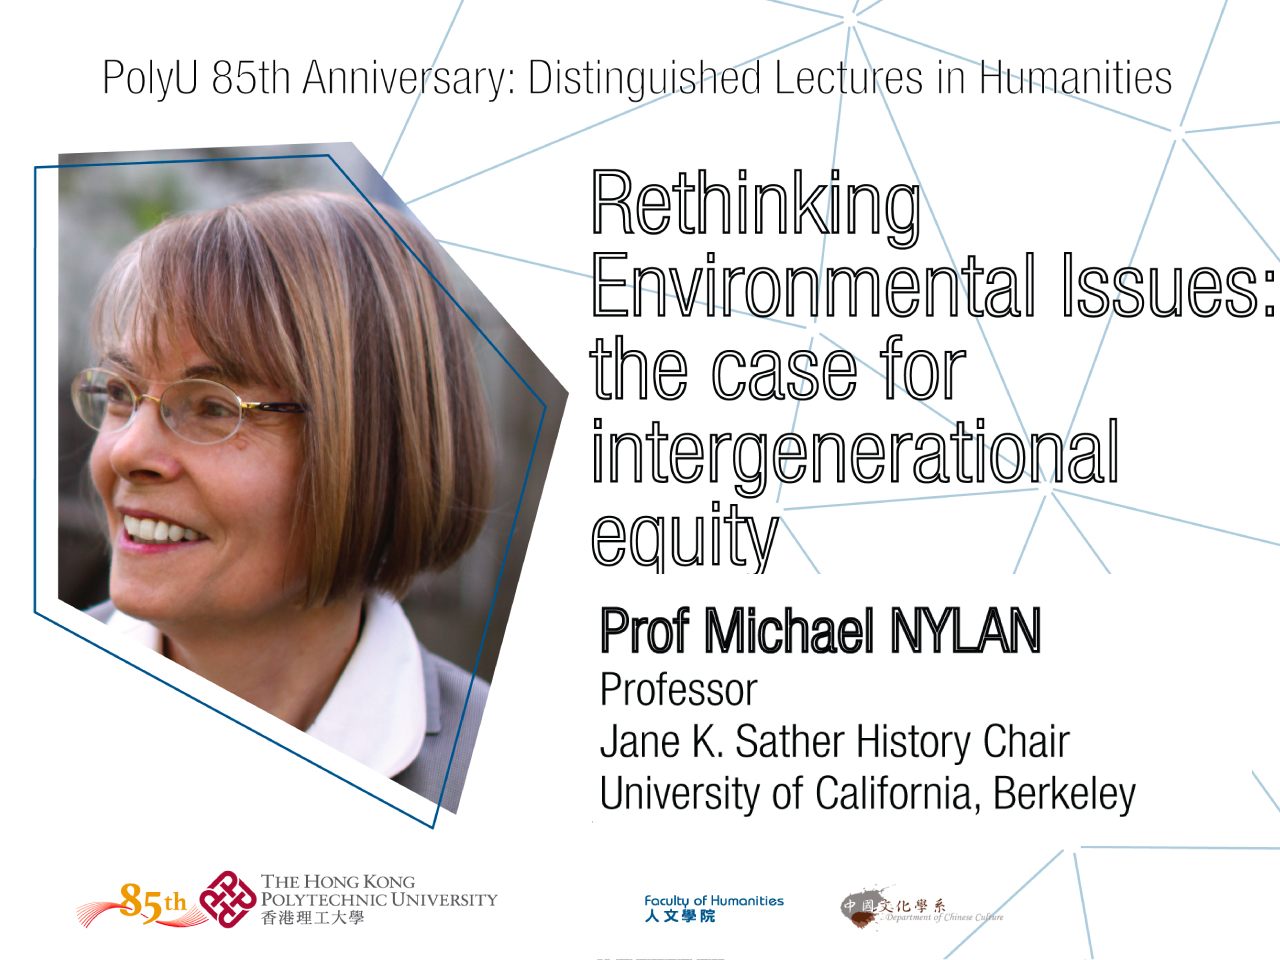 PolyU 85th Anniversary : Distinguished Lectures in Humanities : Rethinking environmental issues: the case for intergenerational equity